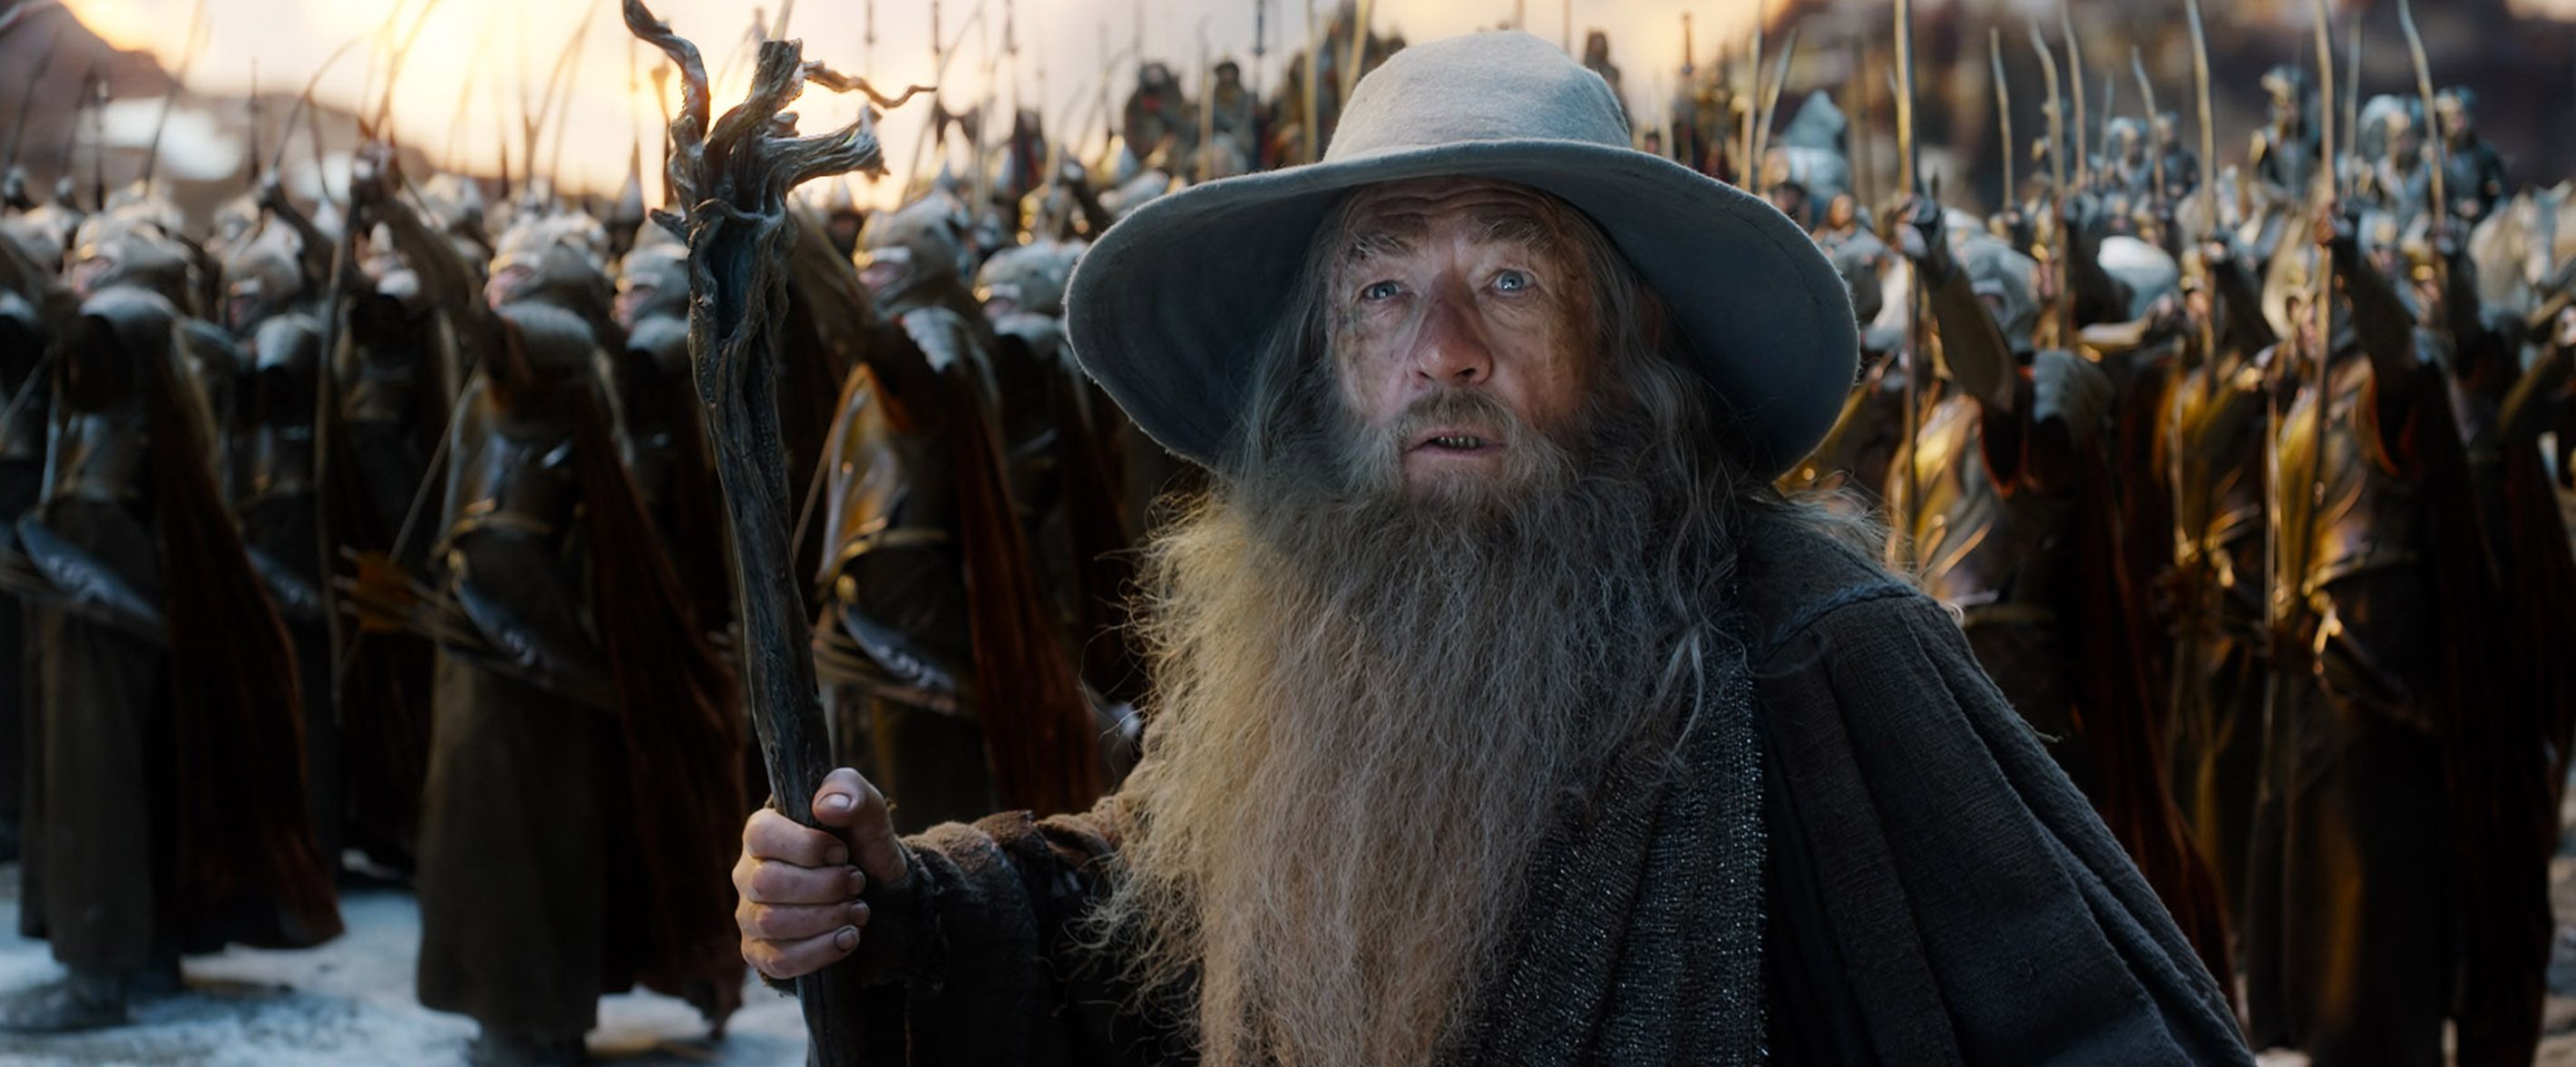 Gandalf and army - The Battle of the Five Armies